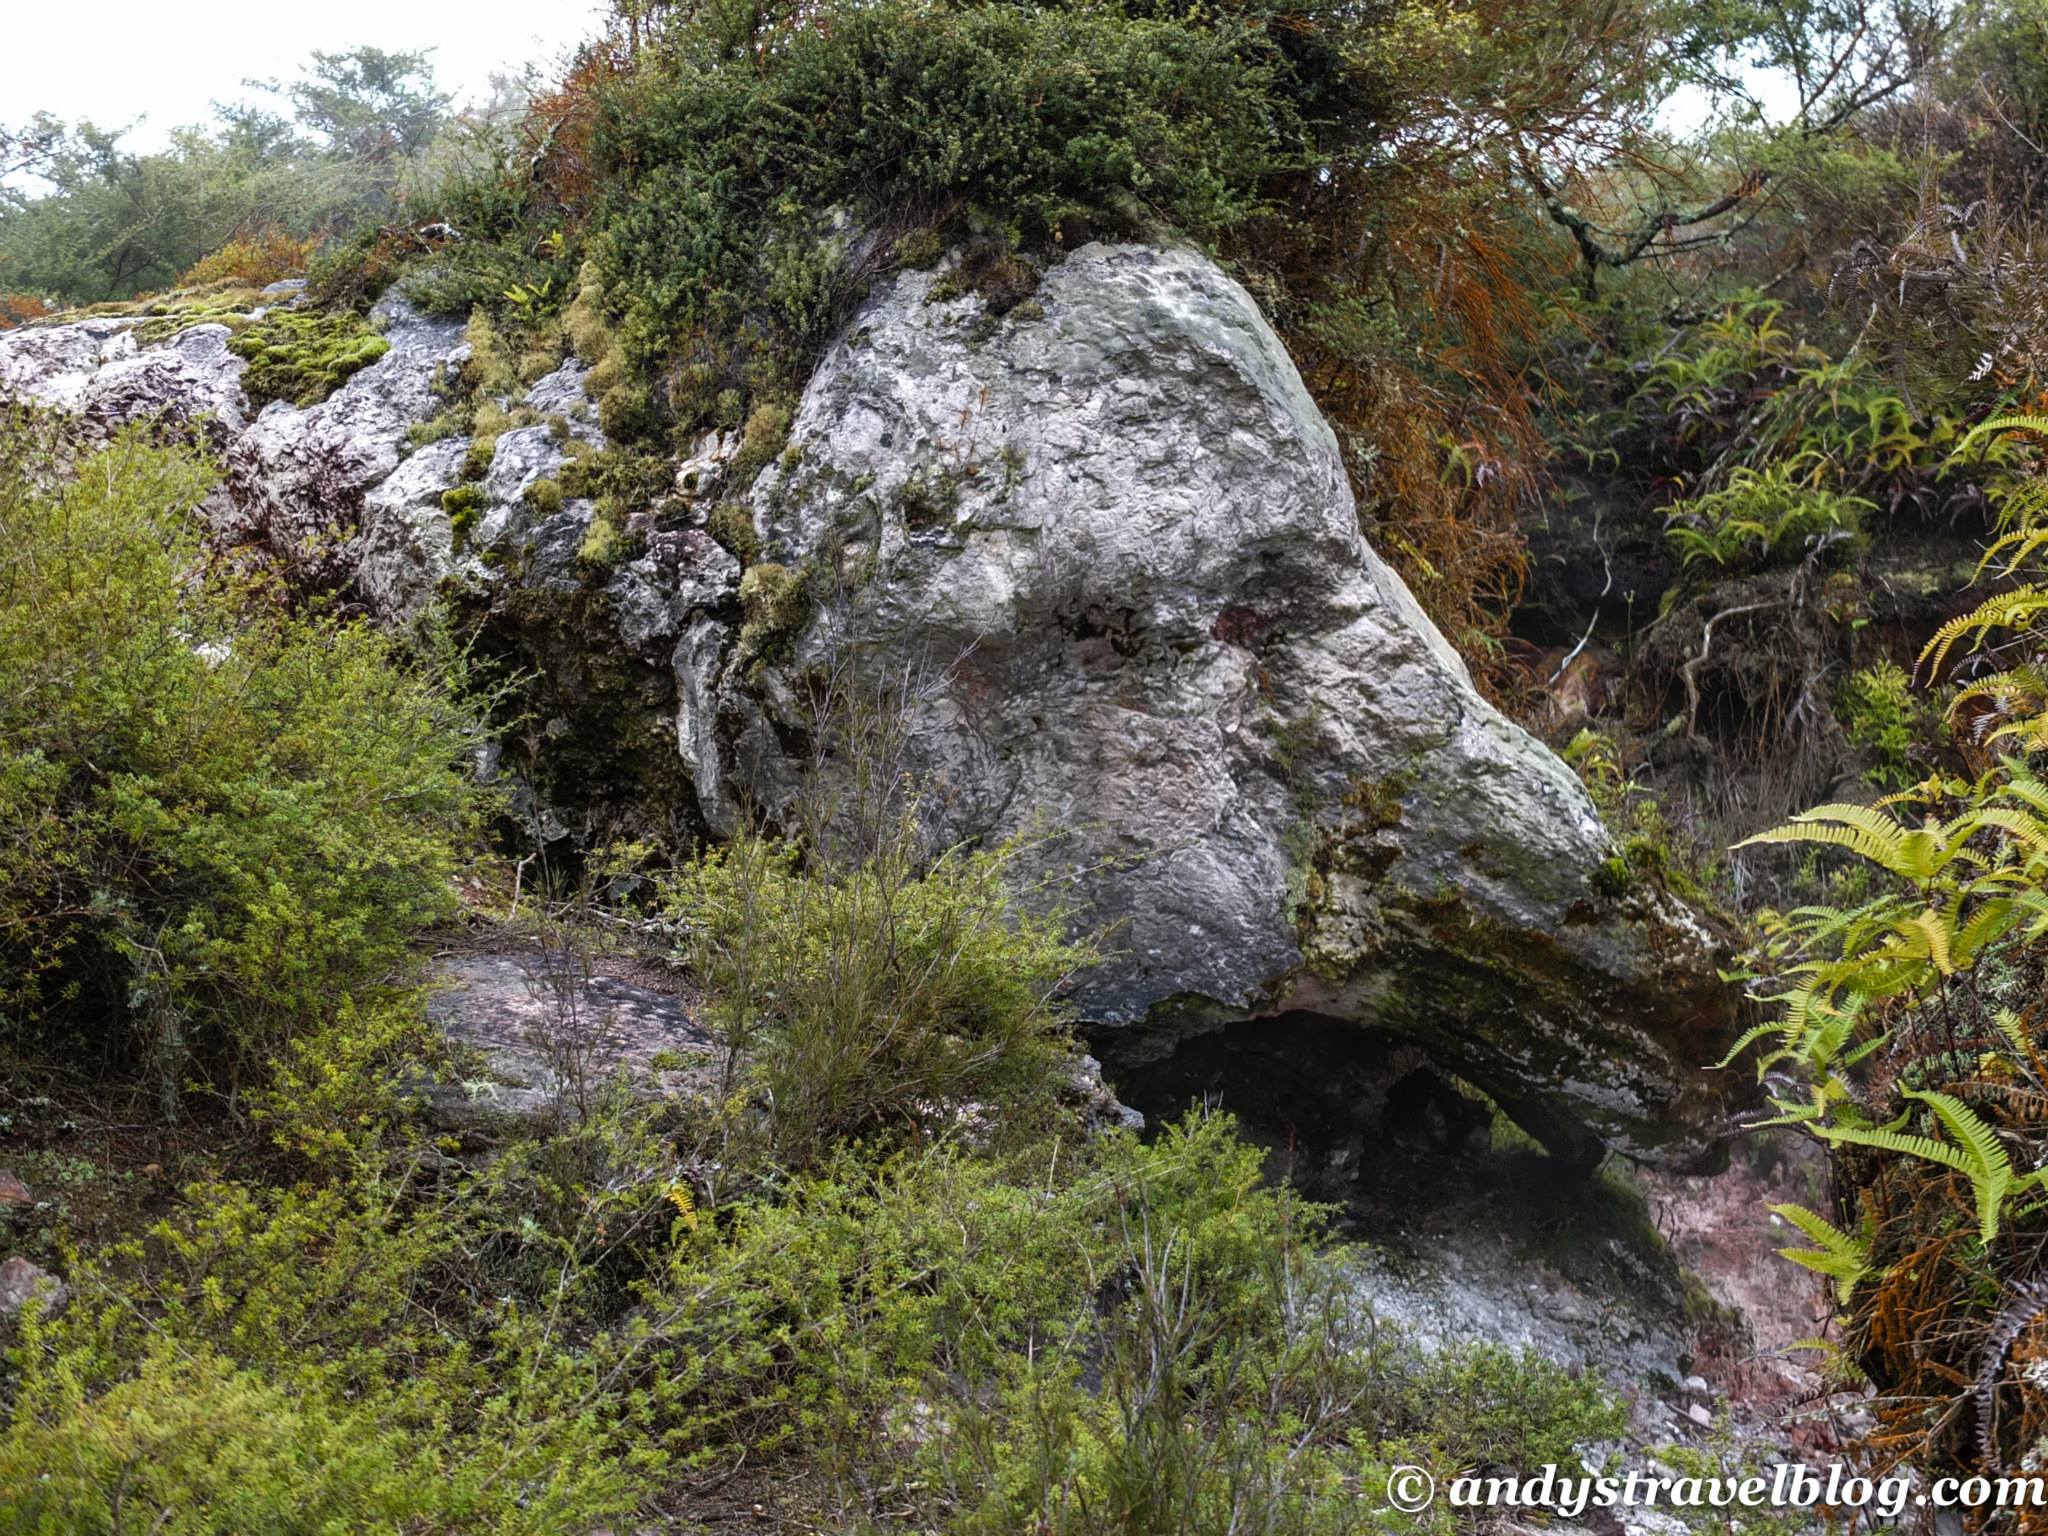 They call this Elephant Rock.  It's an elephant that looks exactly like a rock.